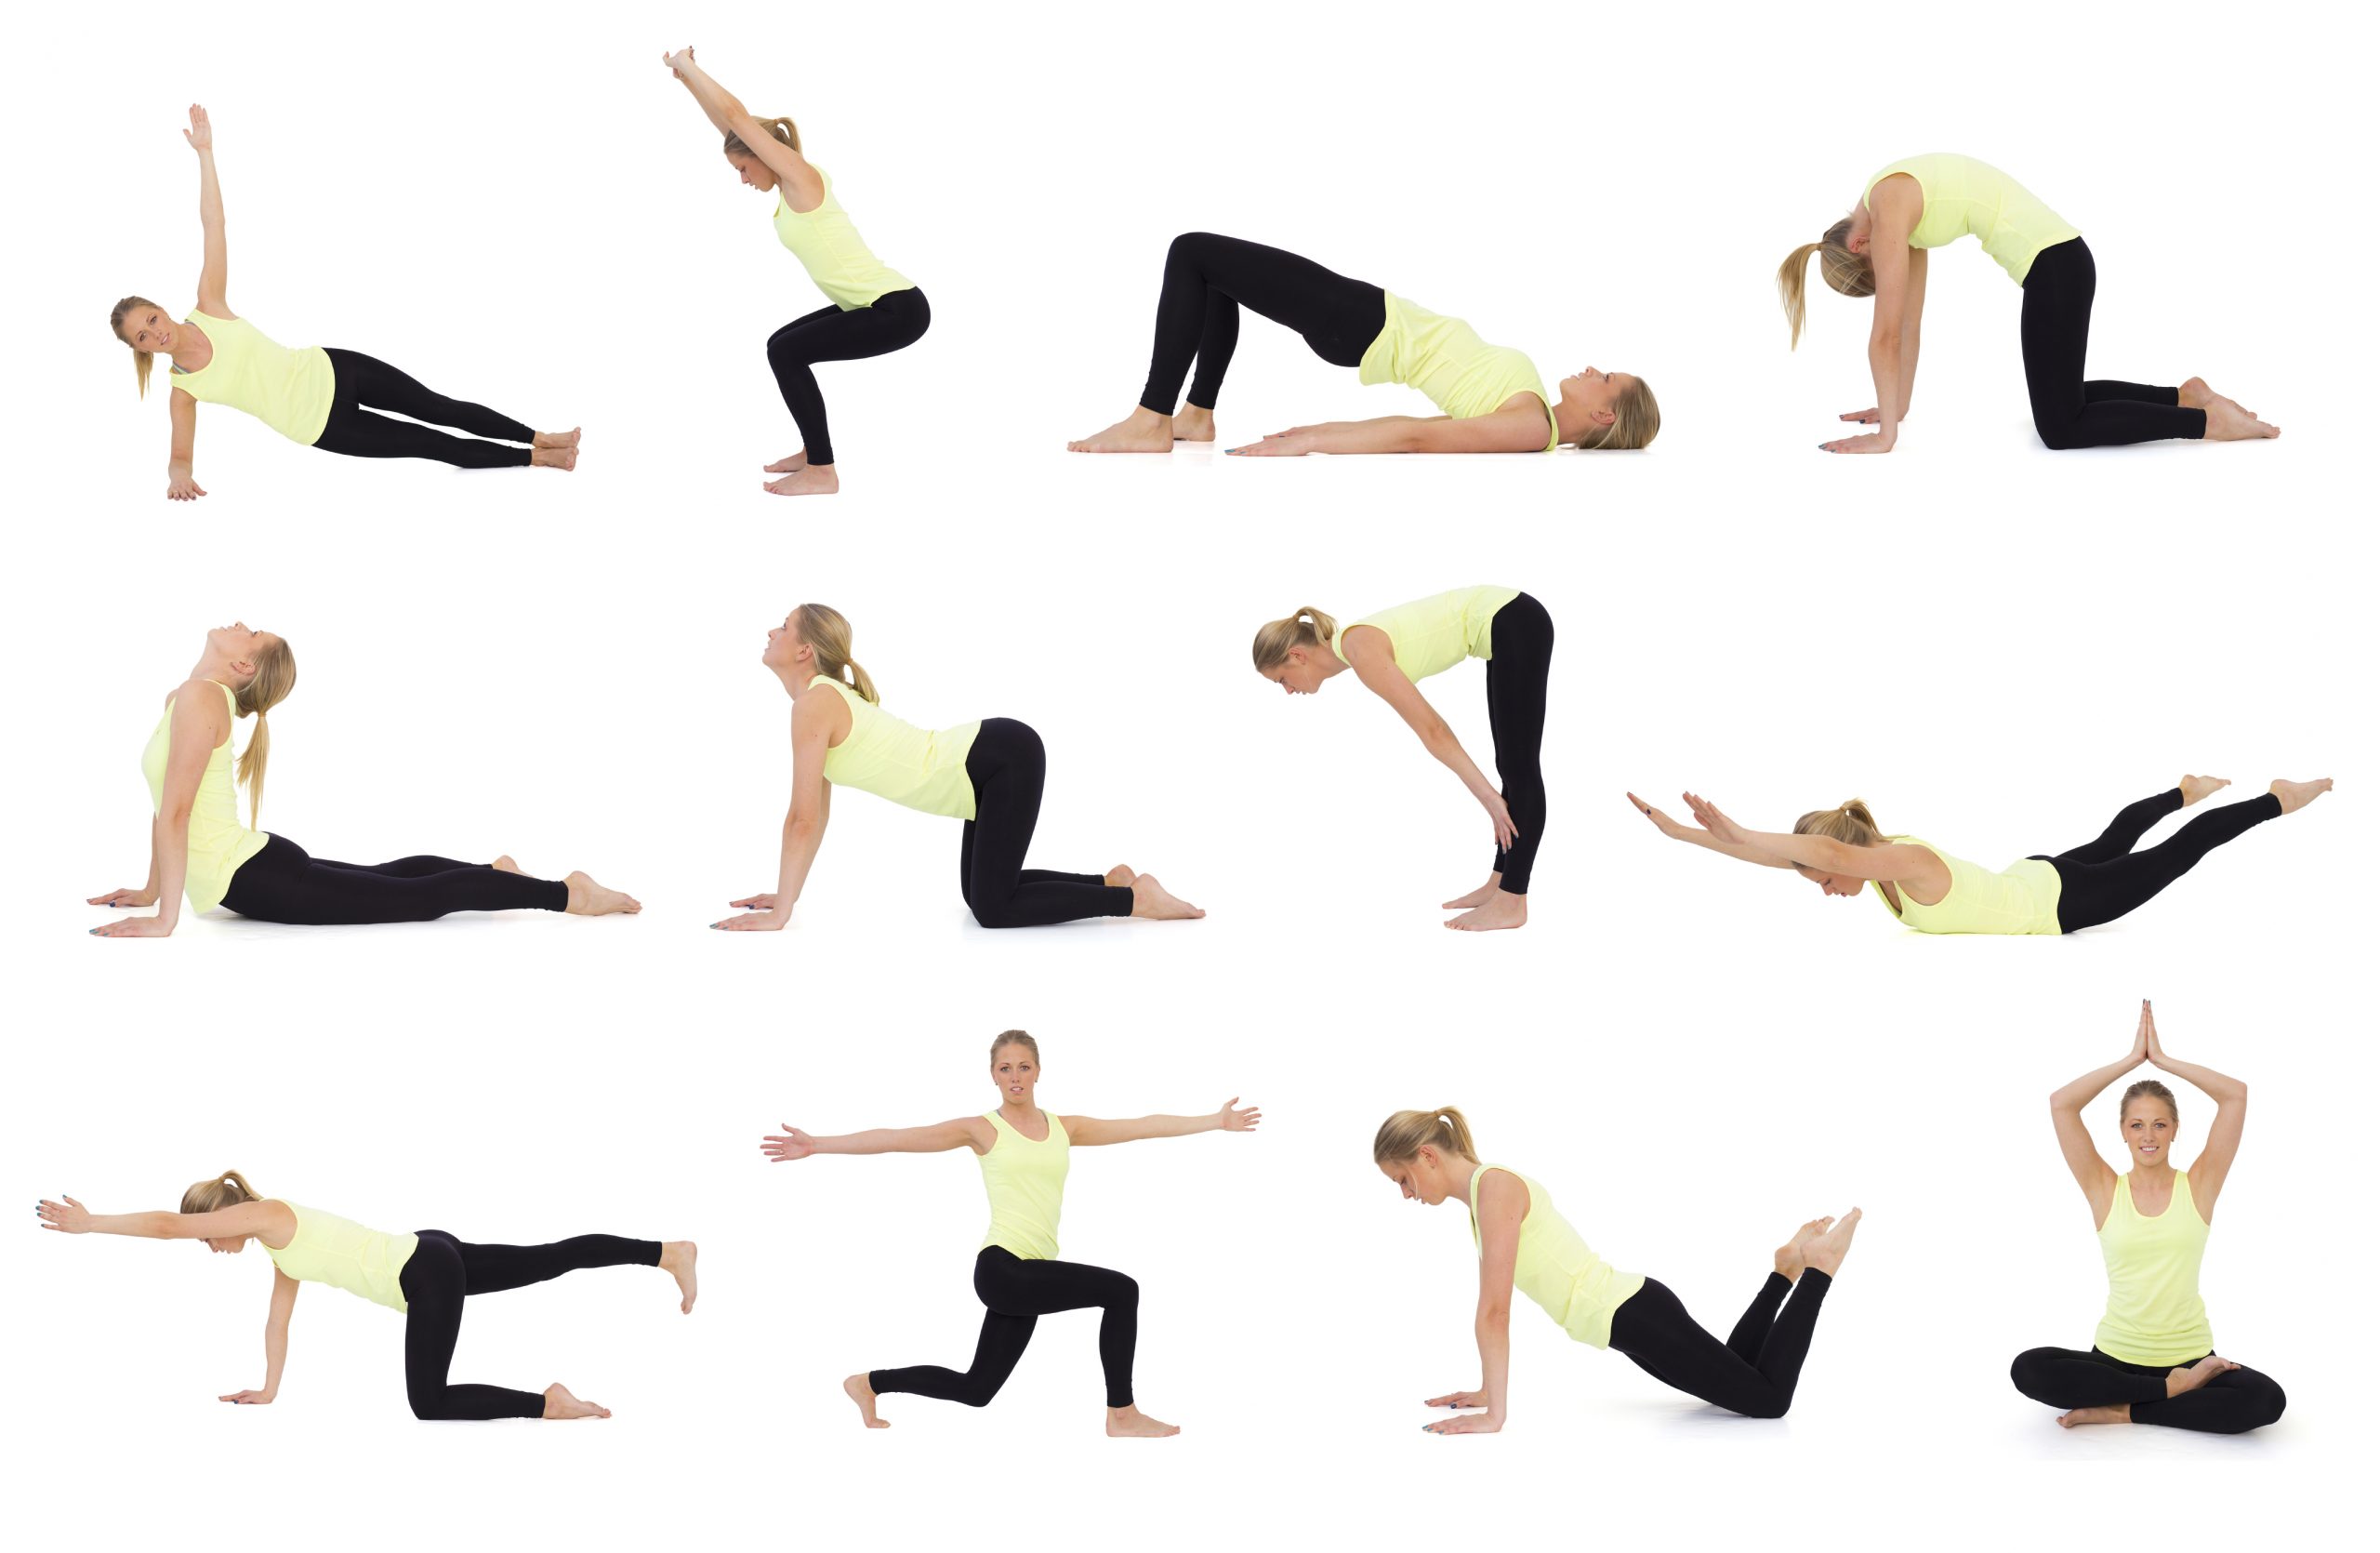 How to get started with yoga? What asanas are preferred for